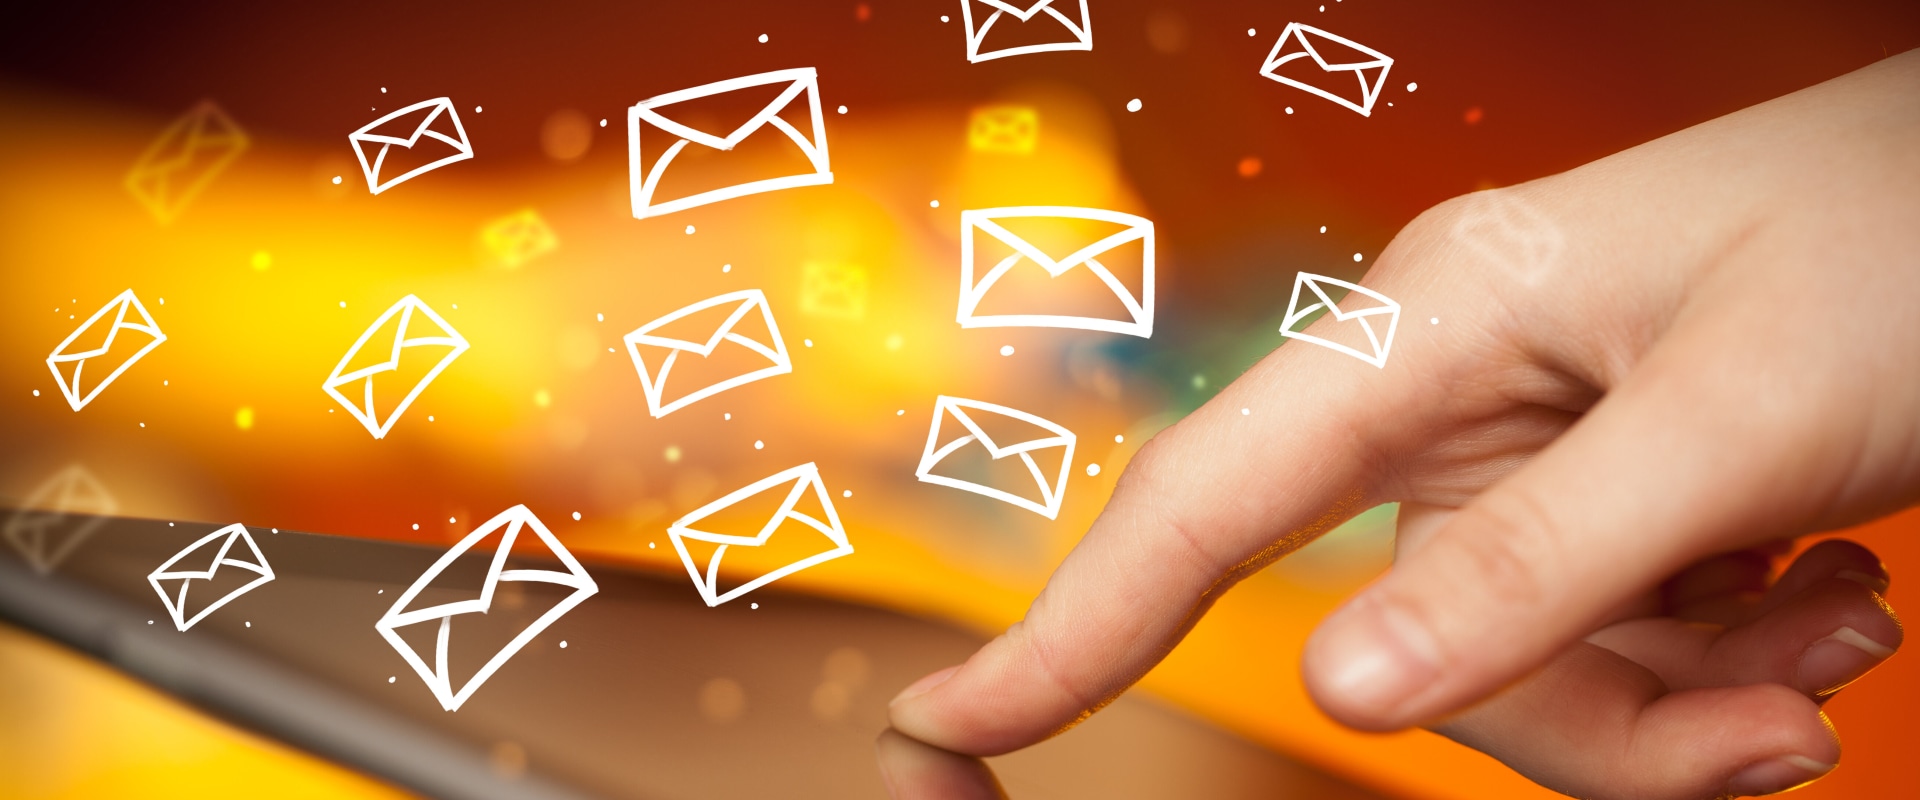 How do i set up email marketing for clients?